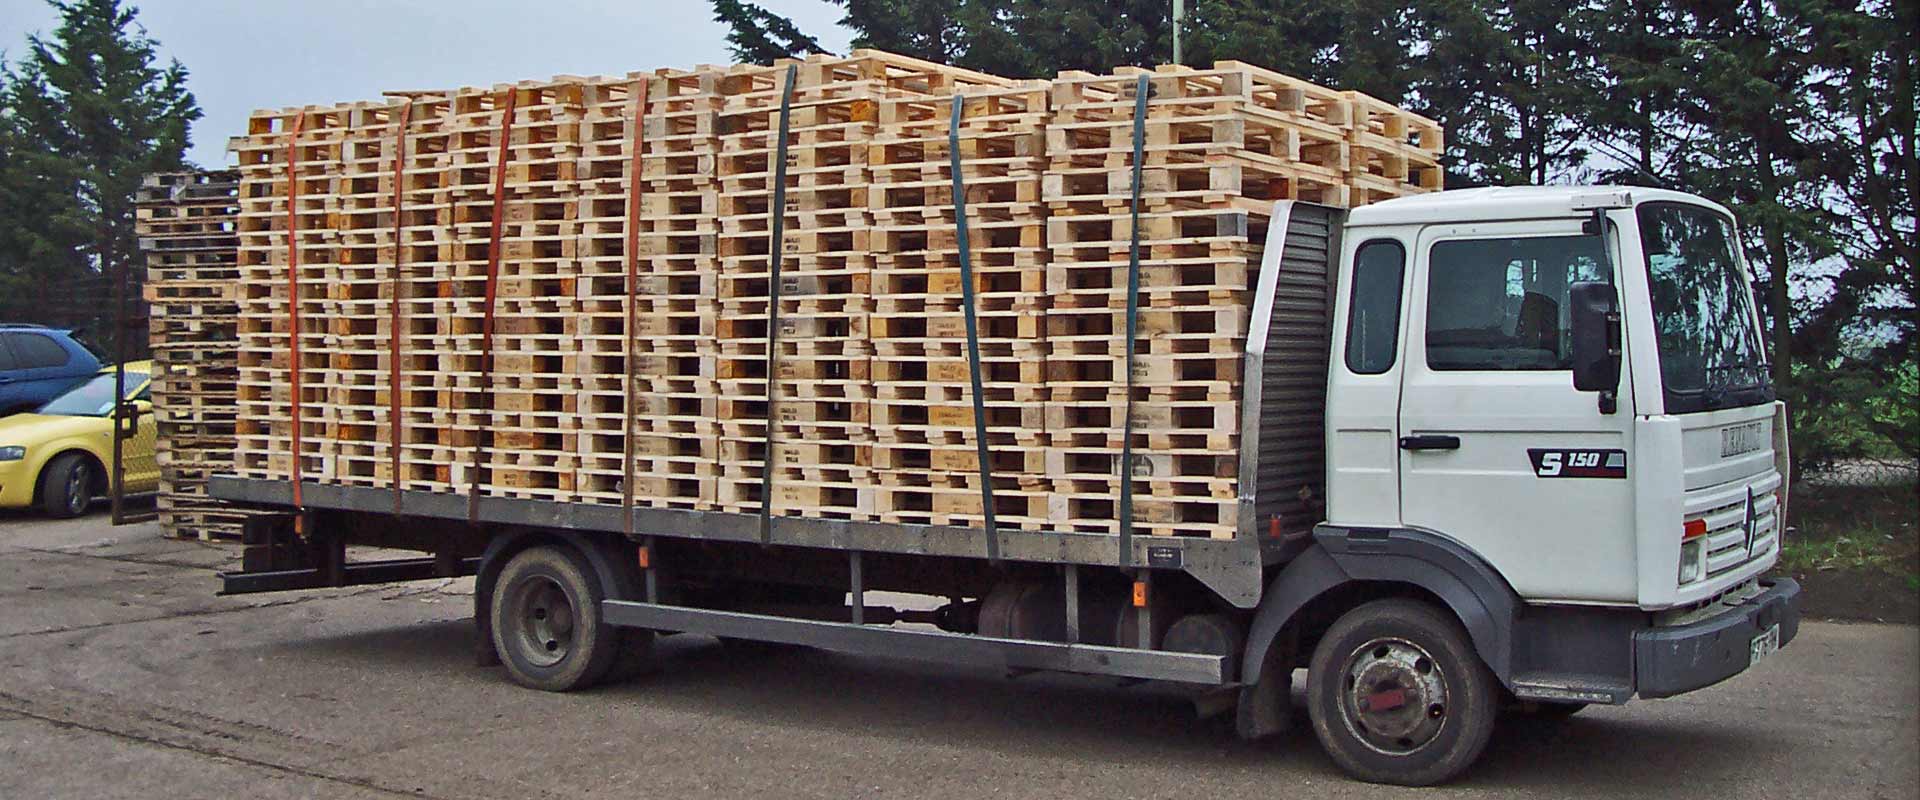 Used Wooden Pallets Bedfordshire